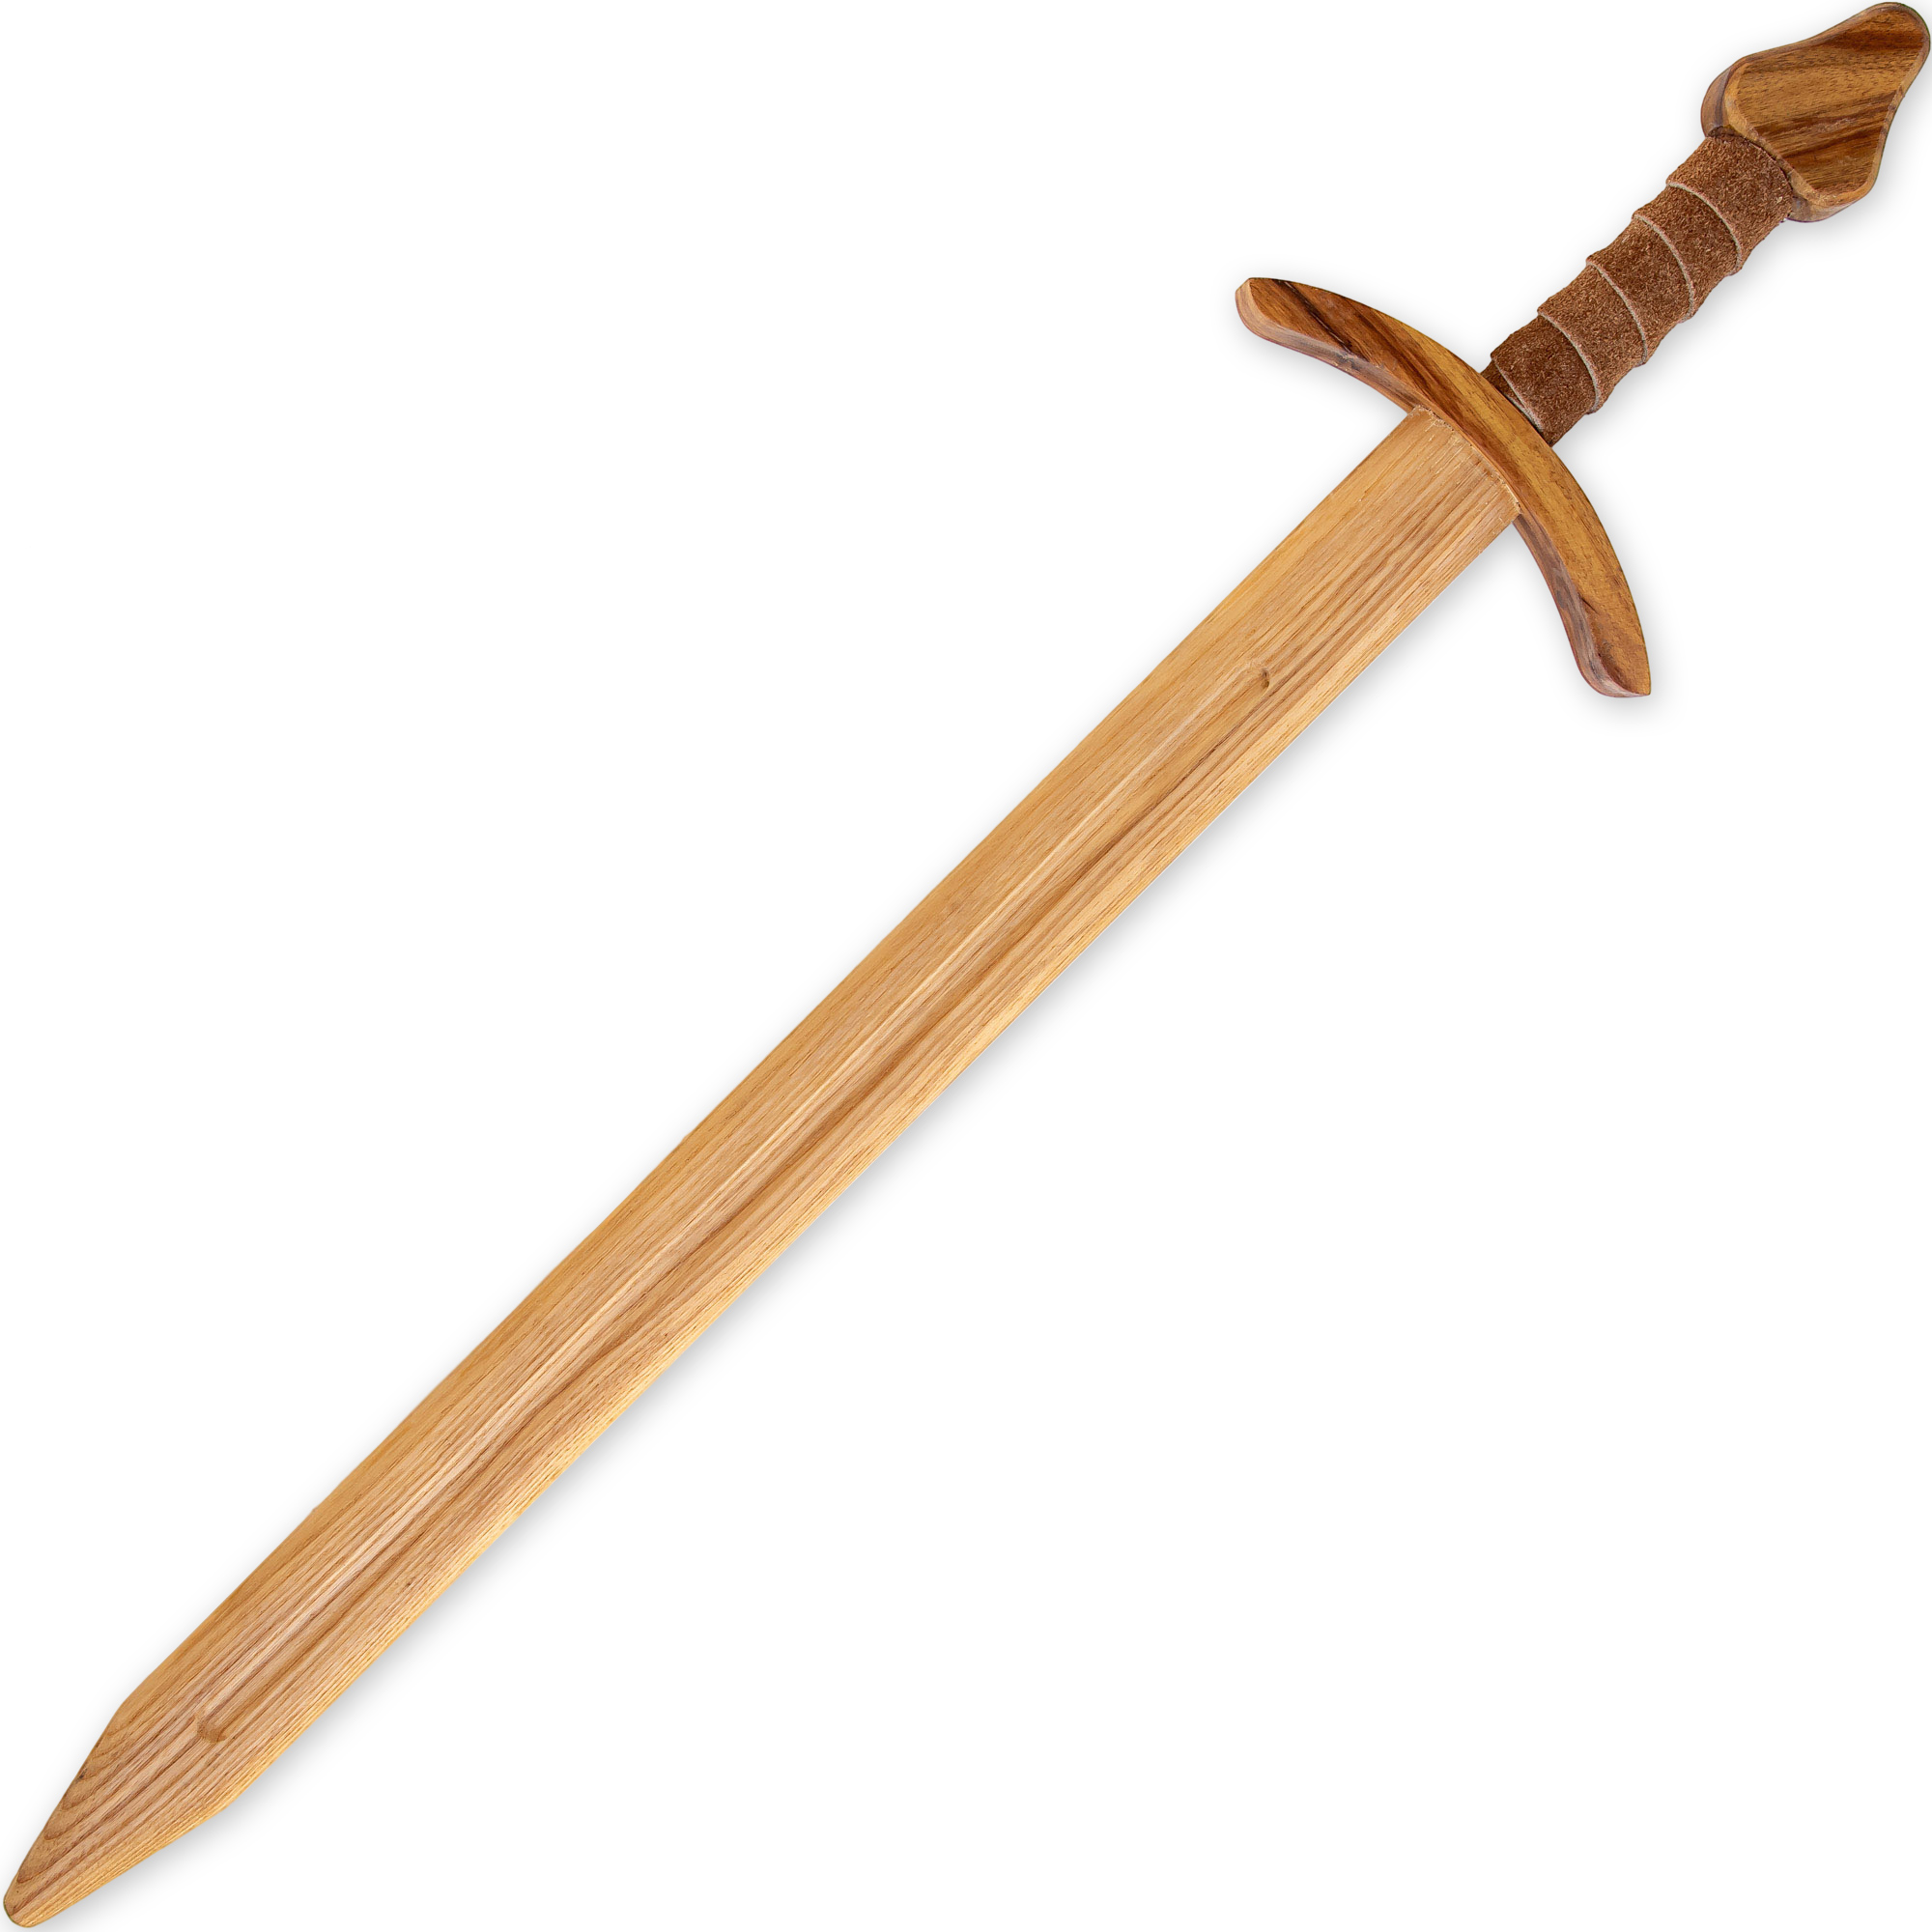 Wooden Replica Knightly SWORD | Steamed Beech Wood w/ Leather Wrapped Handle